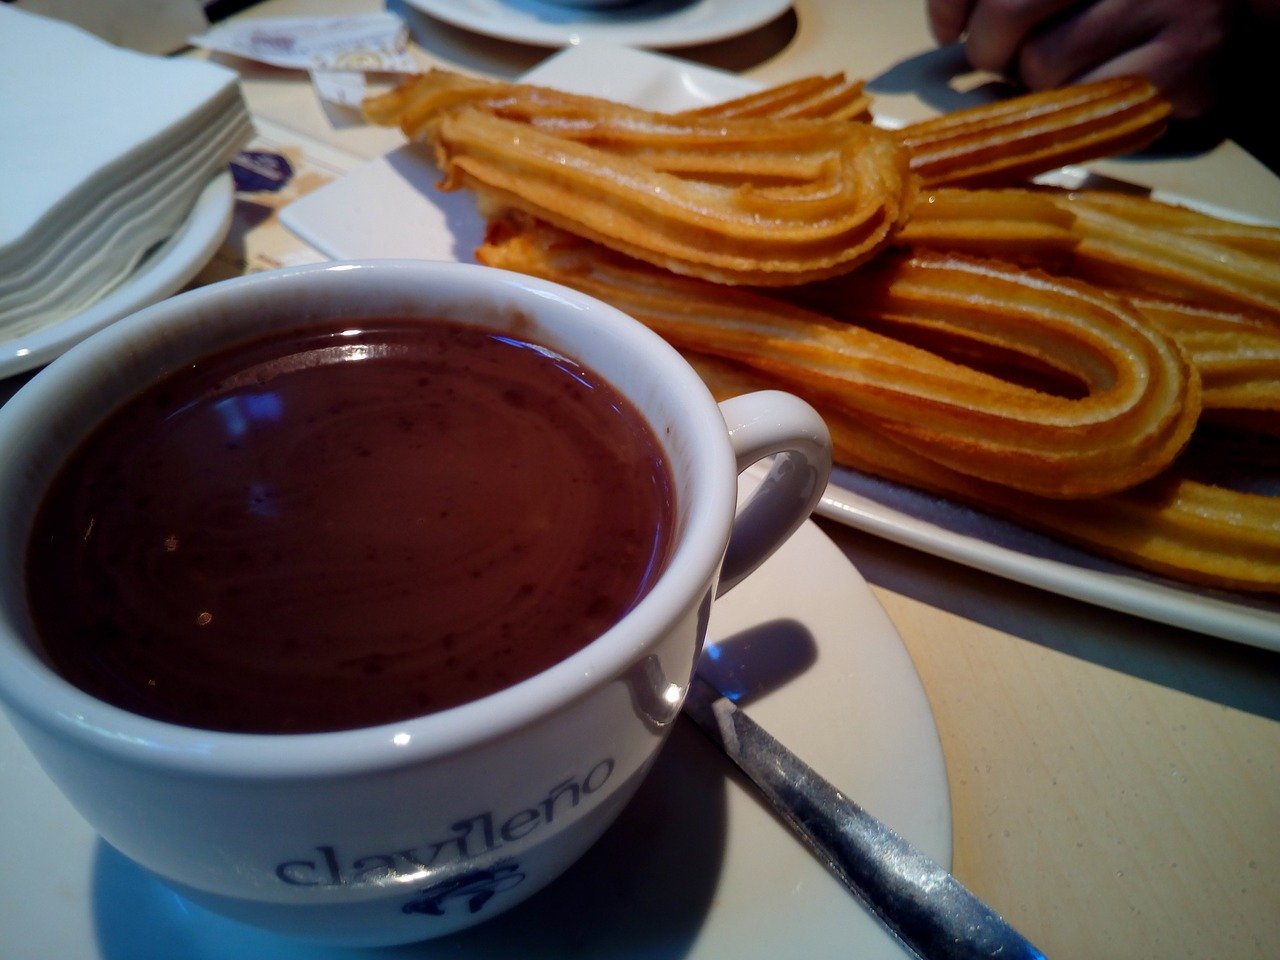 Churros con chocolate are one of the best breakfast dishes in Spain. Discover the best Spanish foods from this article: 16 traditional Spanish dishes to try!